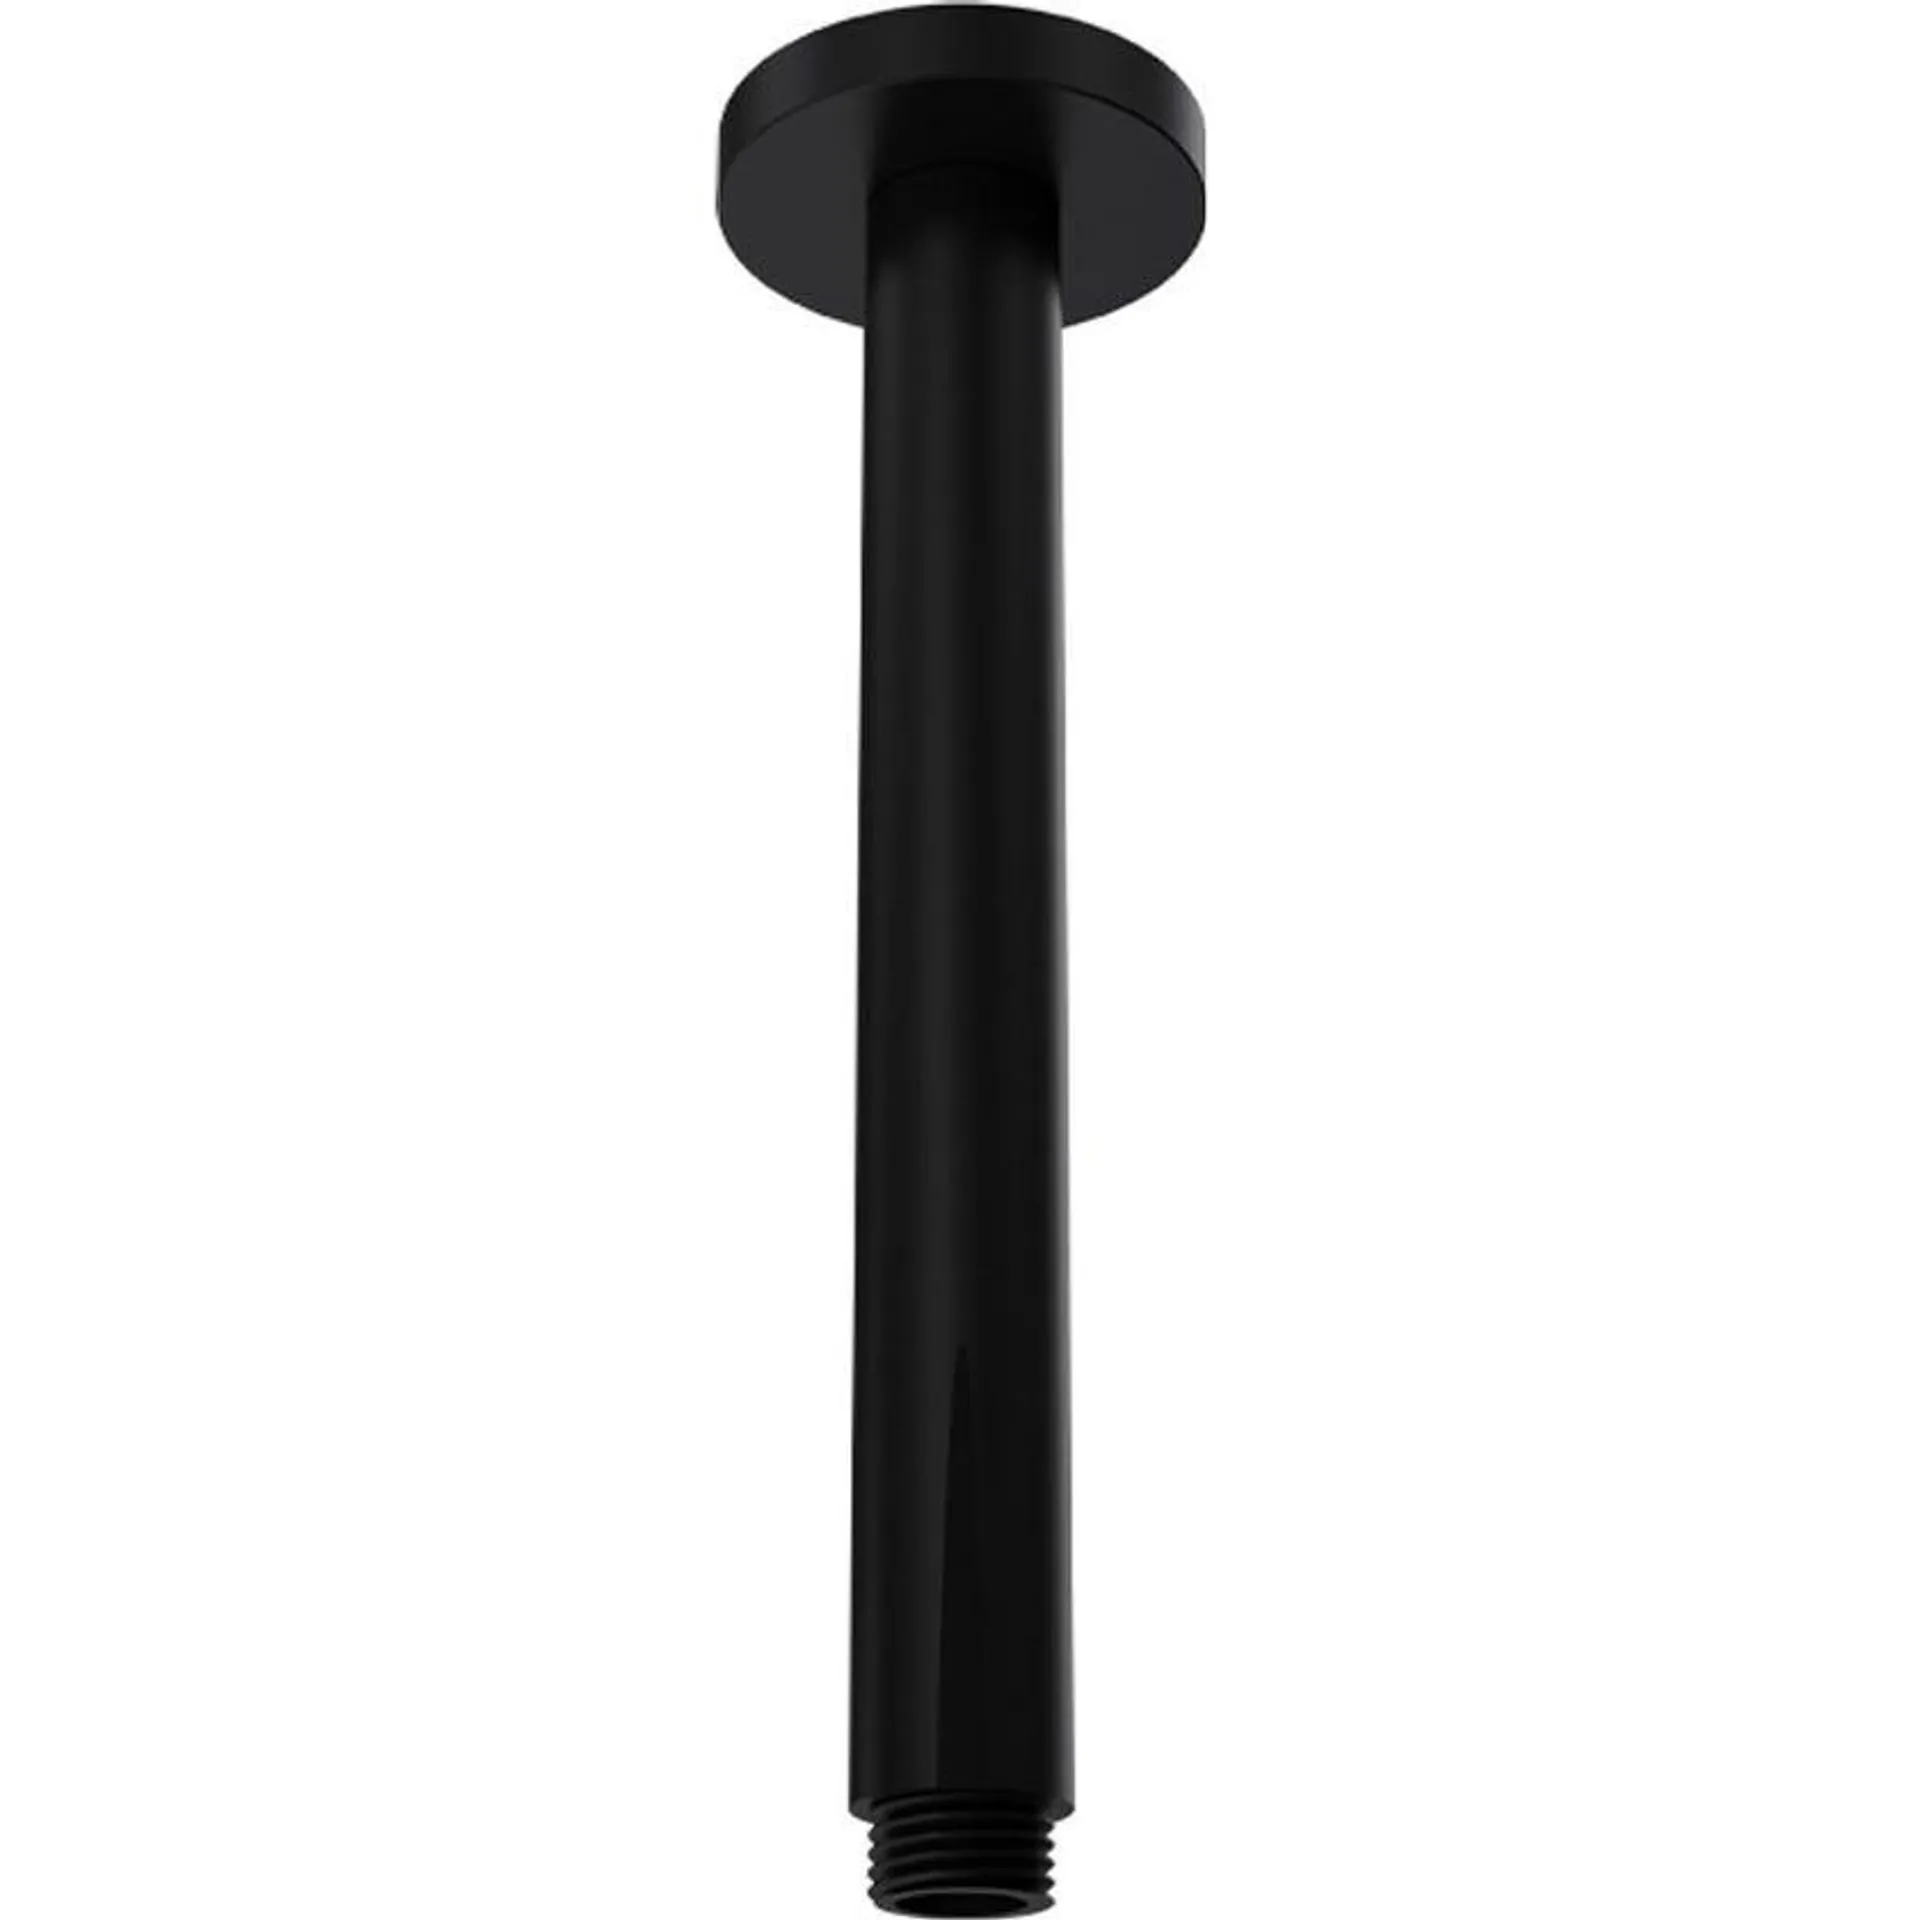 PARISI TOSA1C02 Play Matte Black Ceiling Mounted Shower Arm